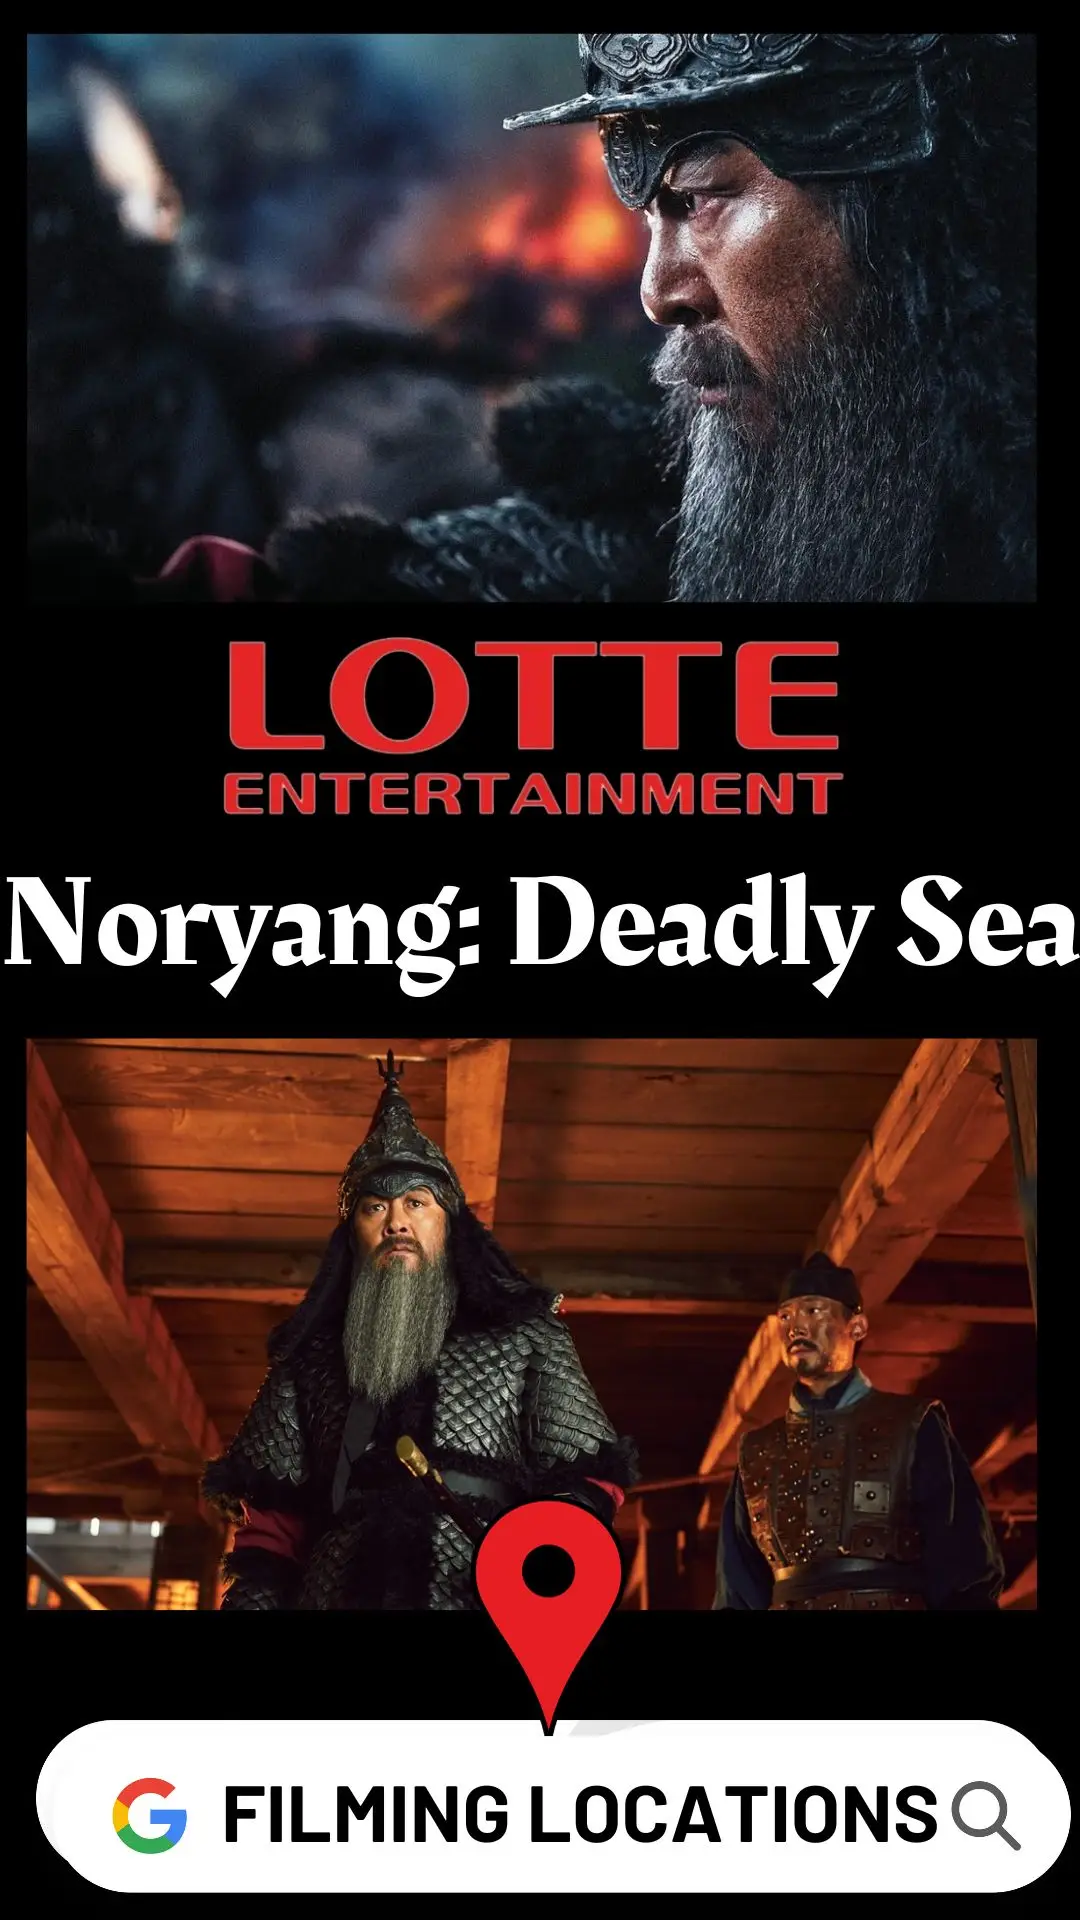 Noryang Deadly SFilming LocationsFilming Locationsea Filming Locations